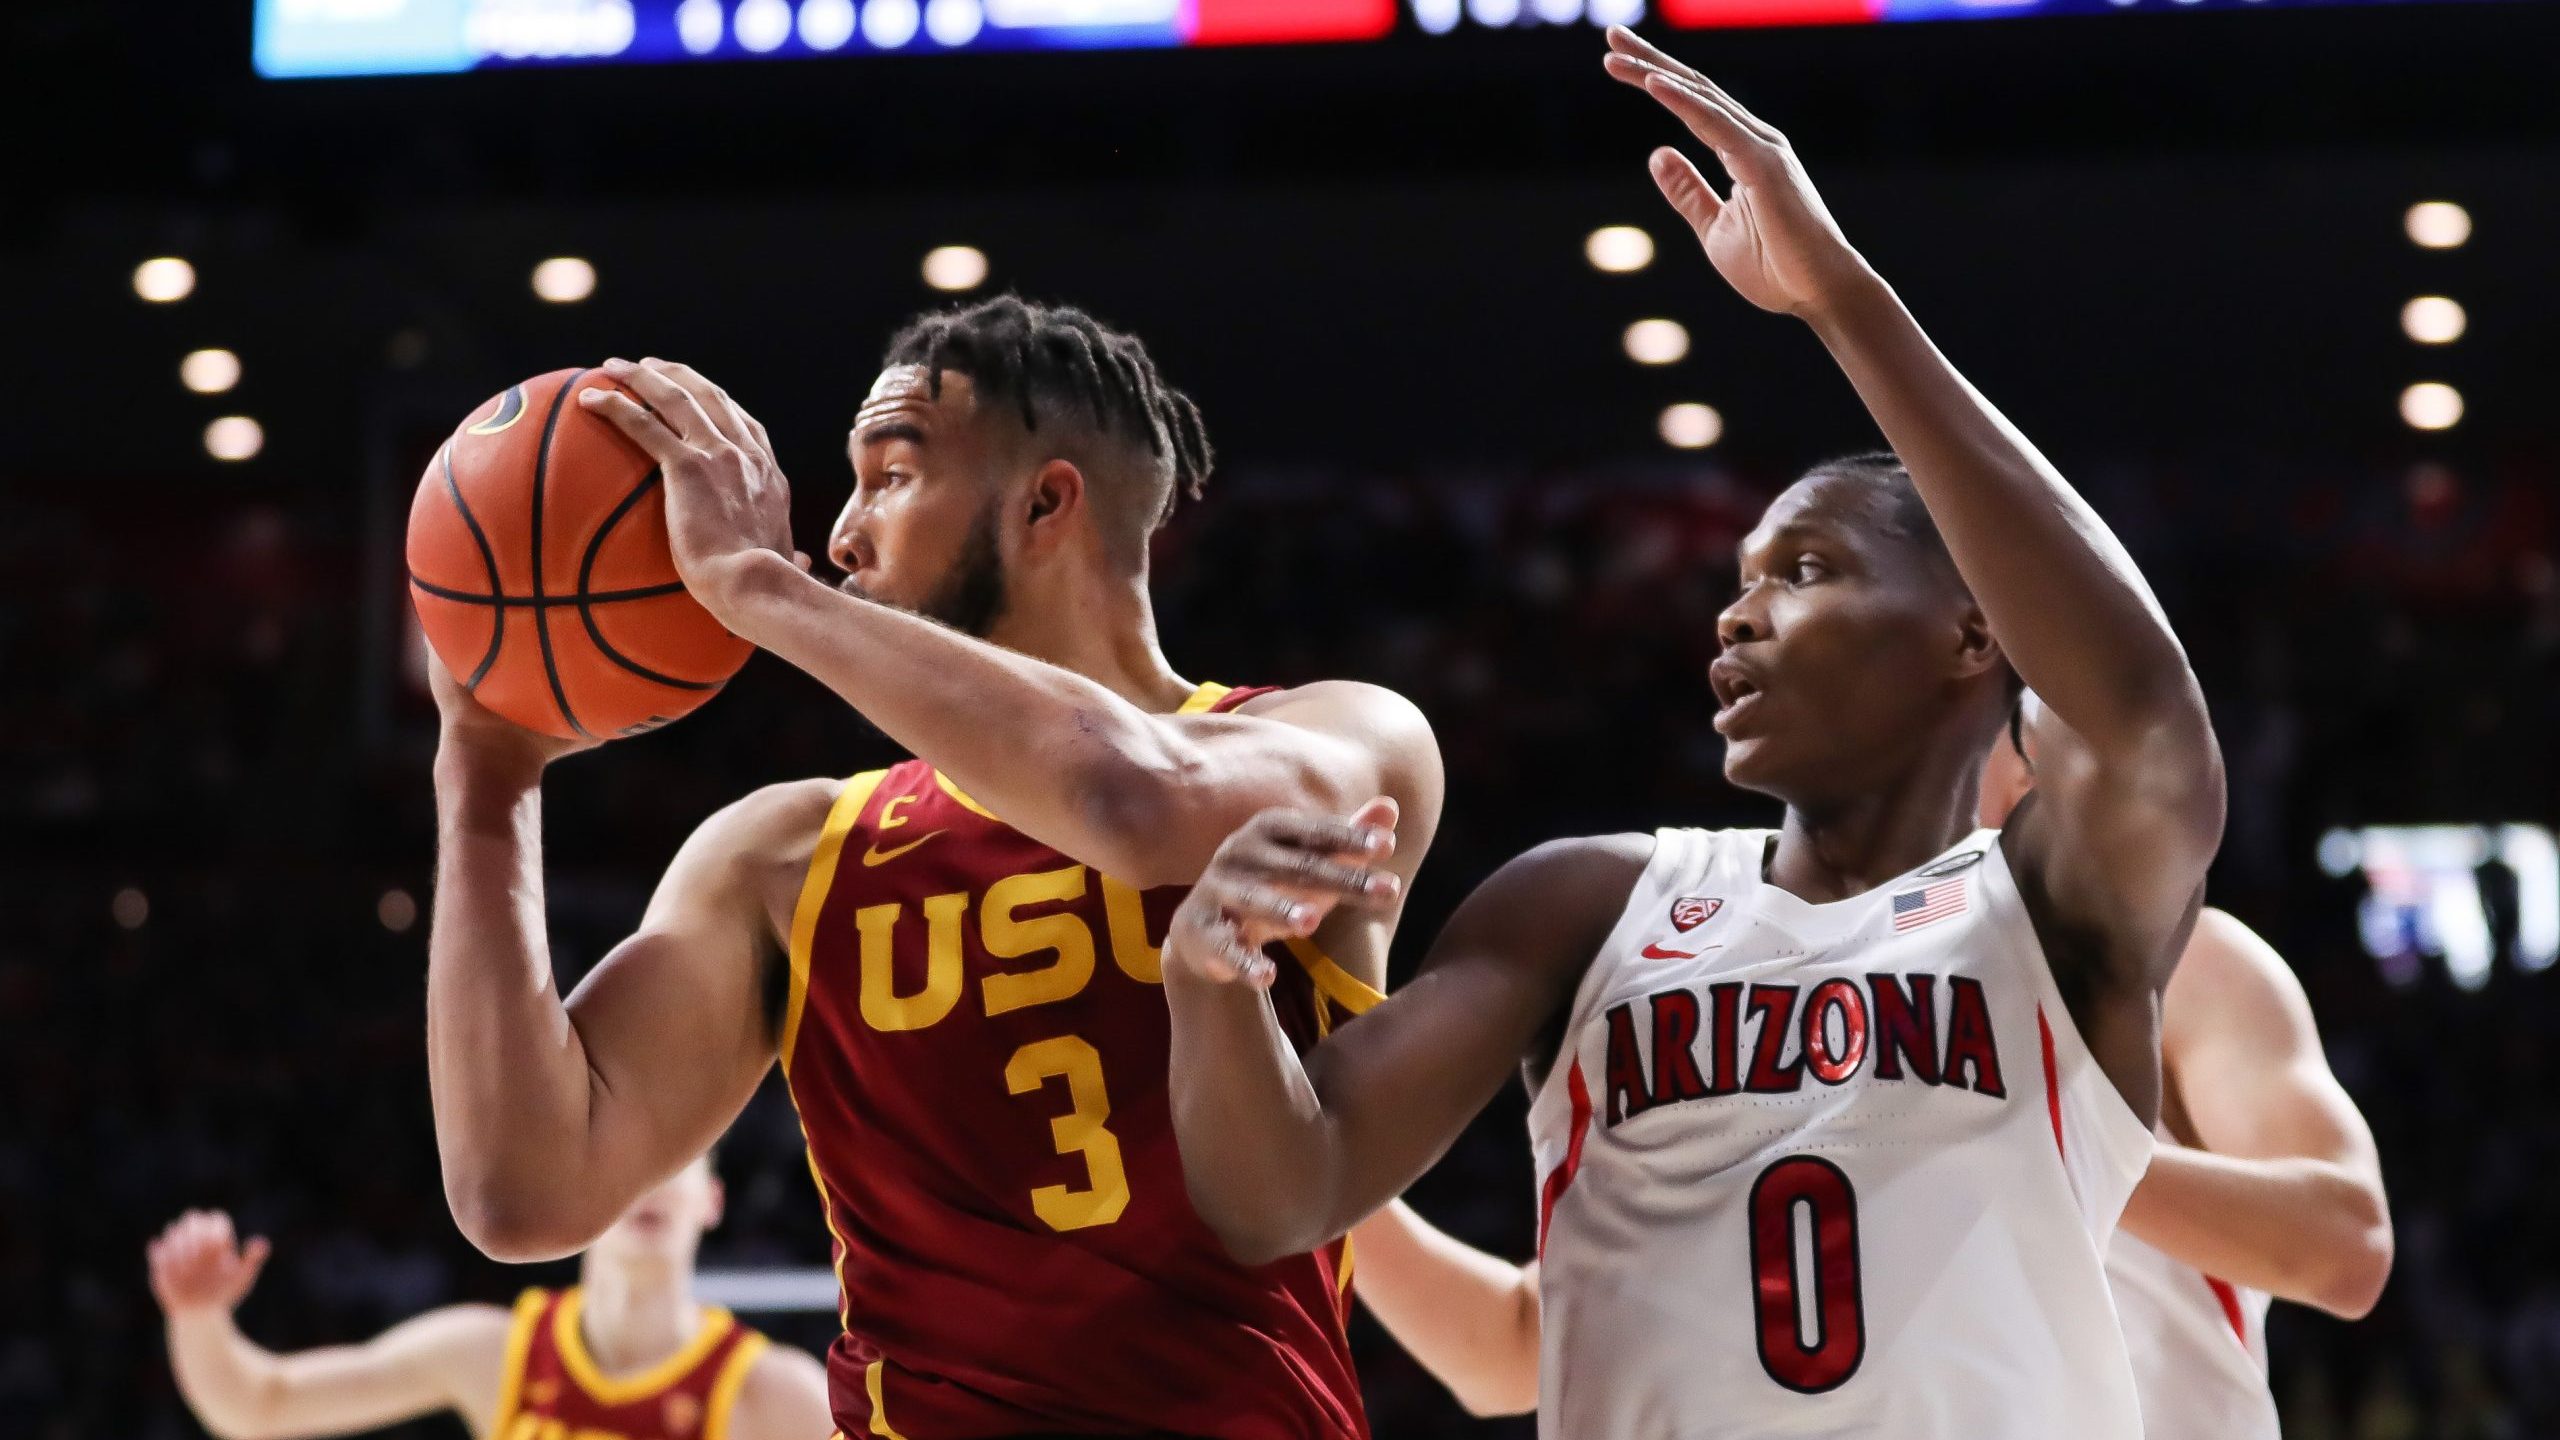 TUCSON, ARIZONA - FEB. 05: Forward Isaiah Mobley #3 of the USC Trojans looks for an open teammate i...